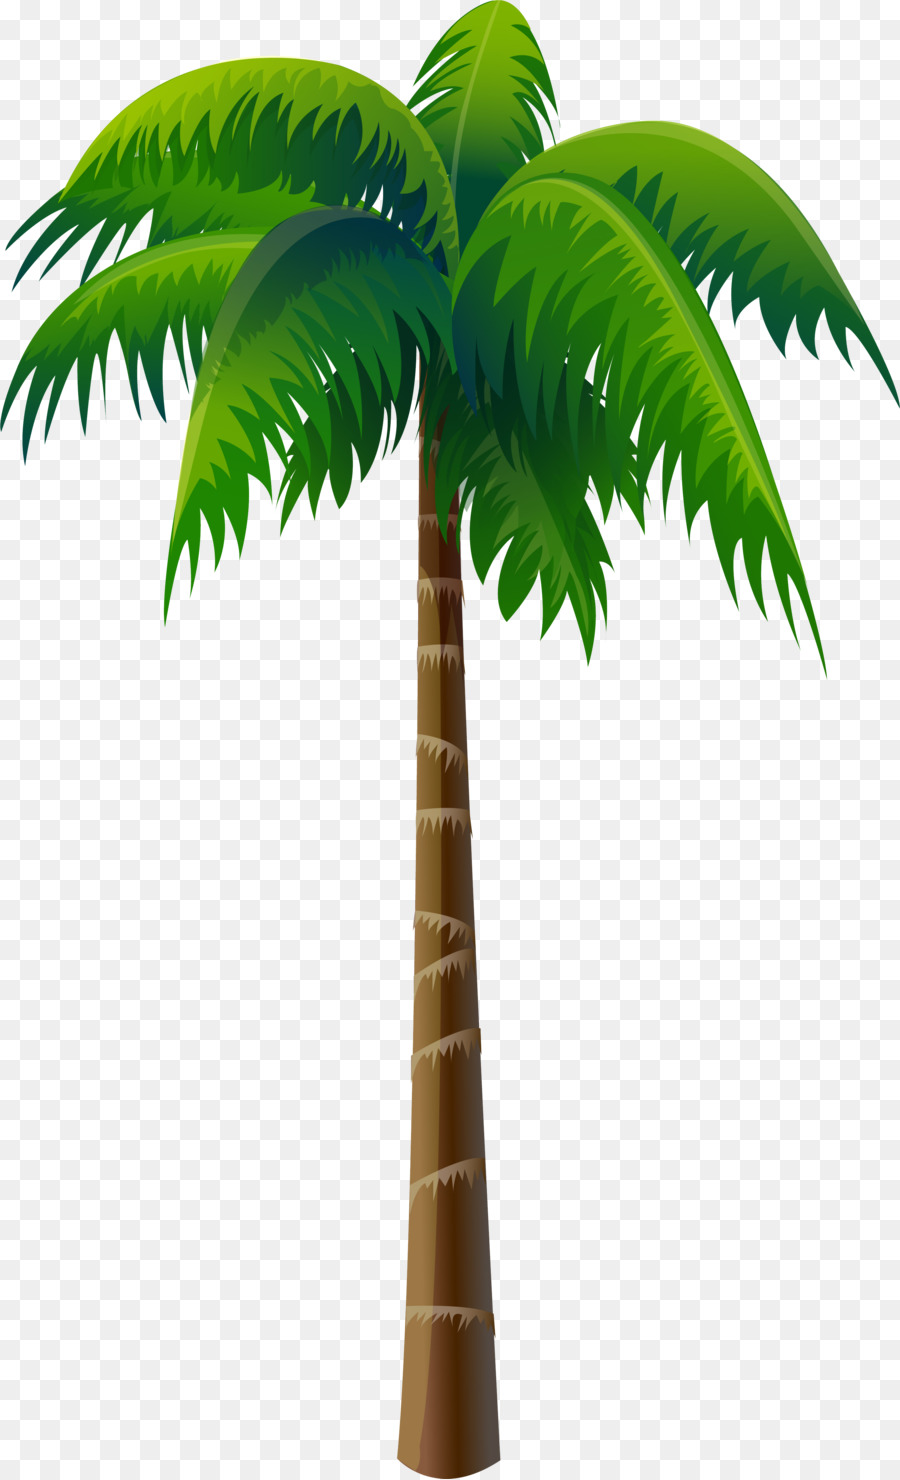 Arecaceae Coconut Tree - palms png download - 3004*4936 - Free